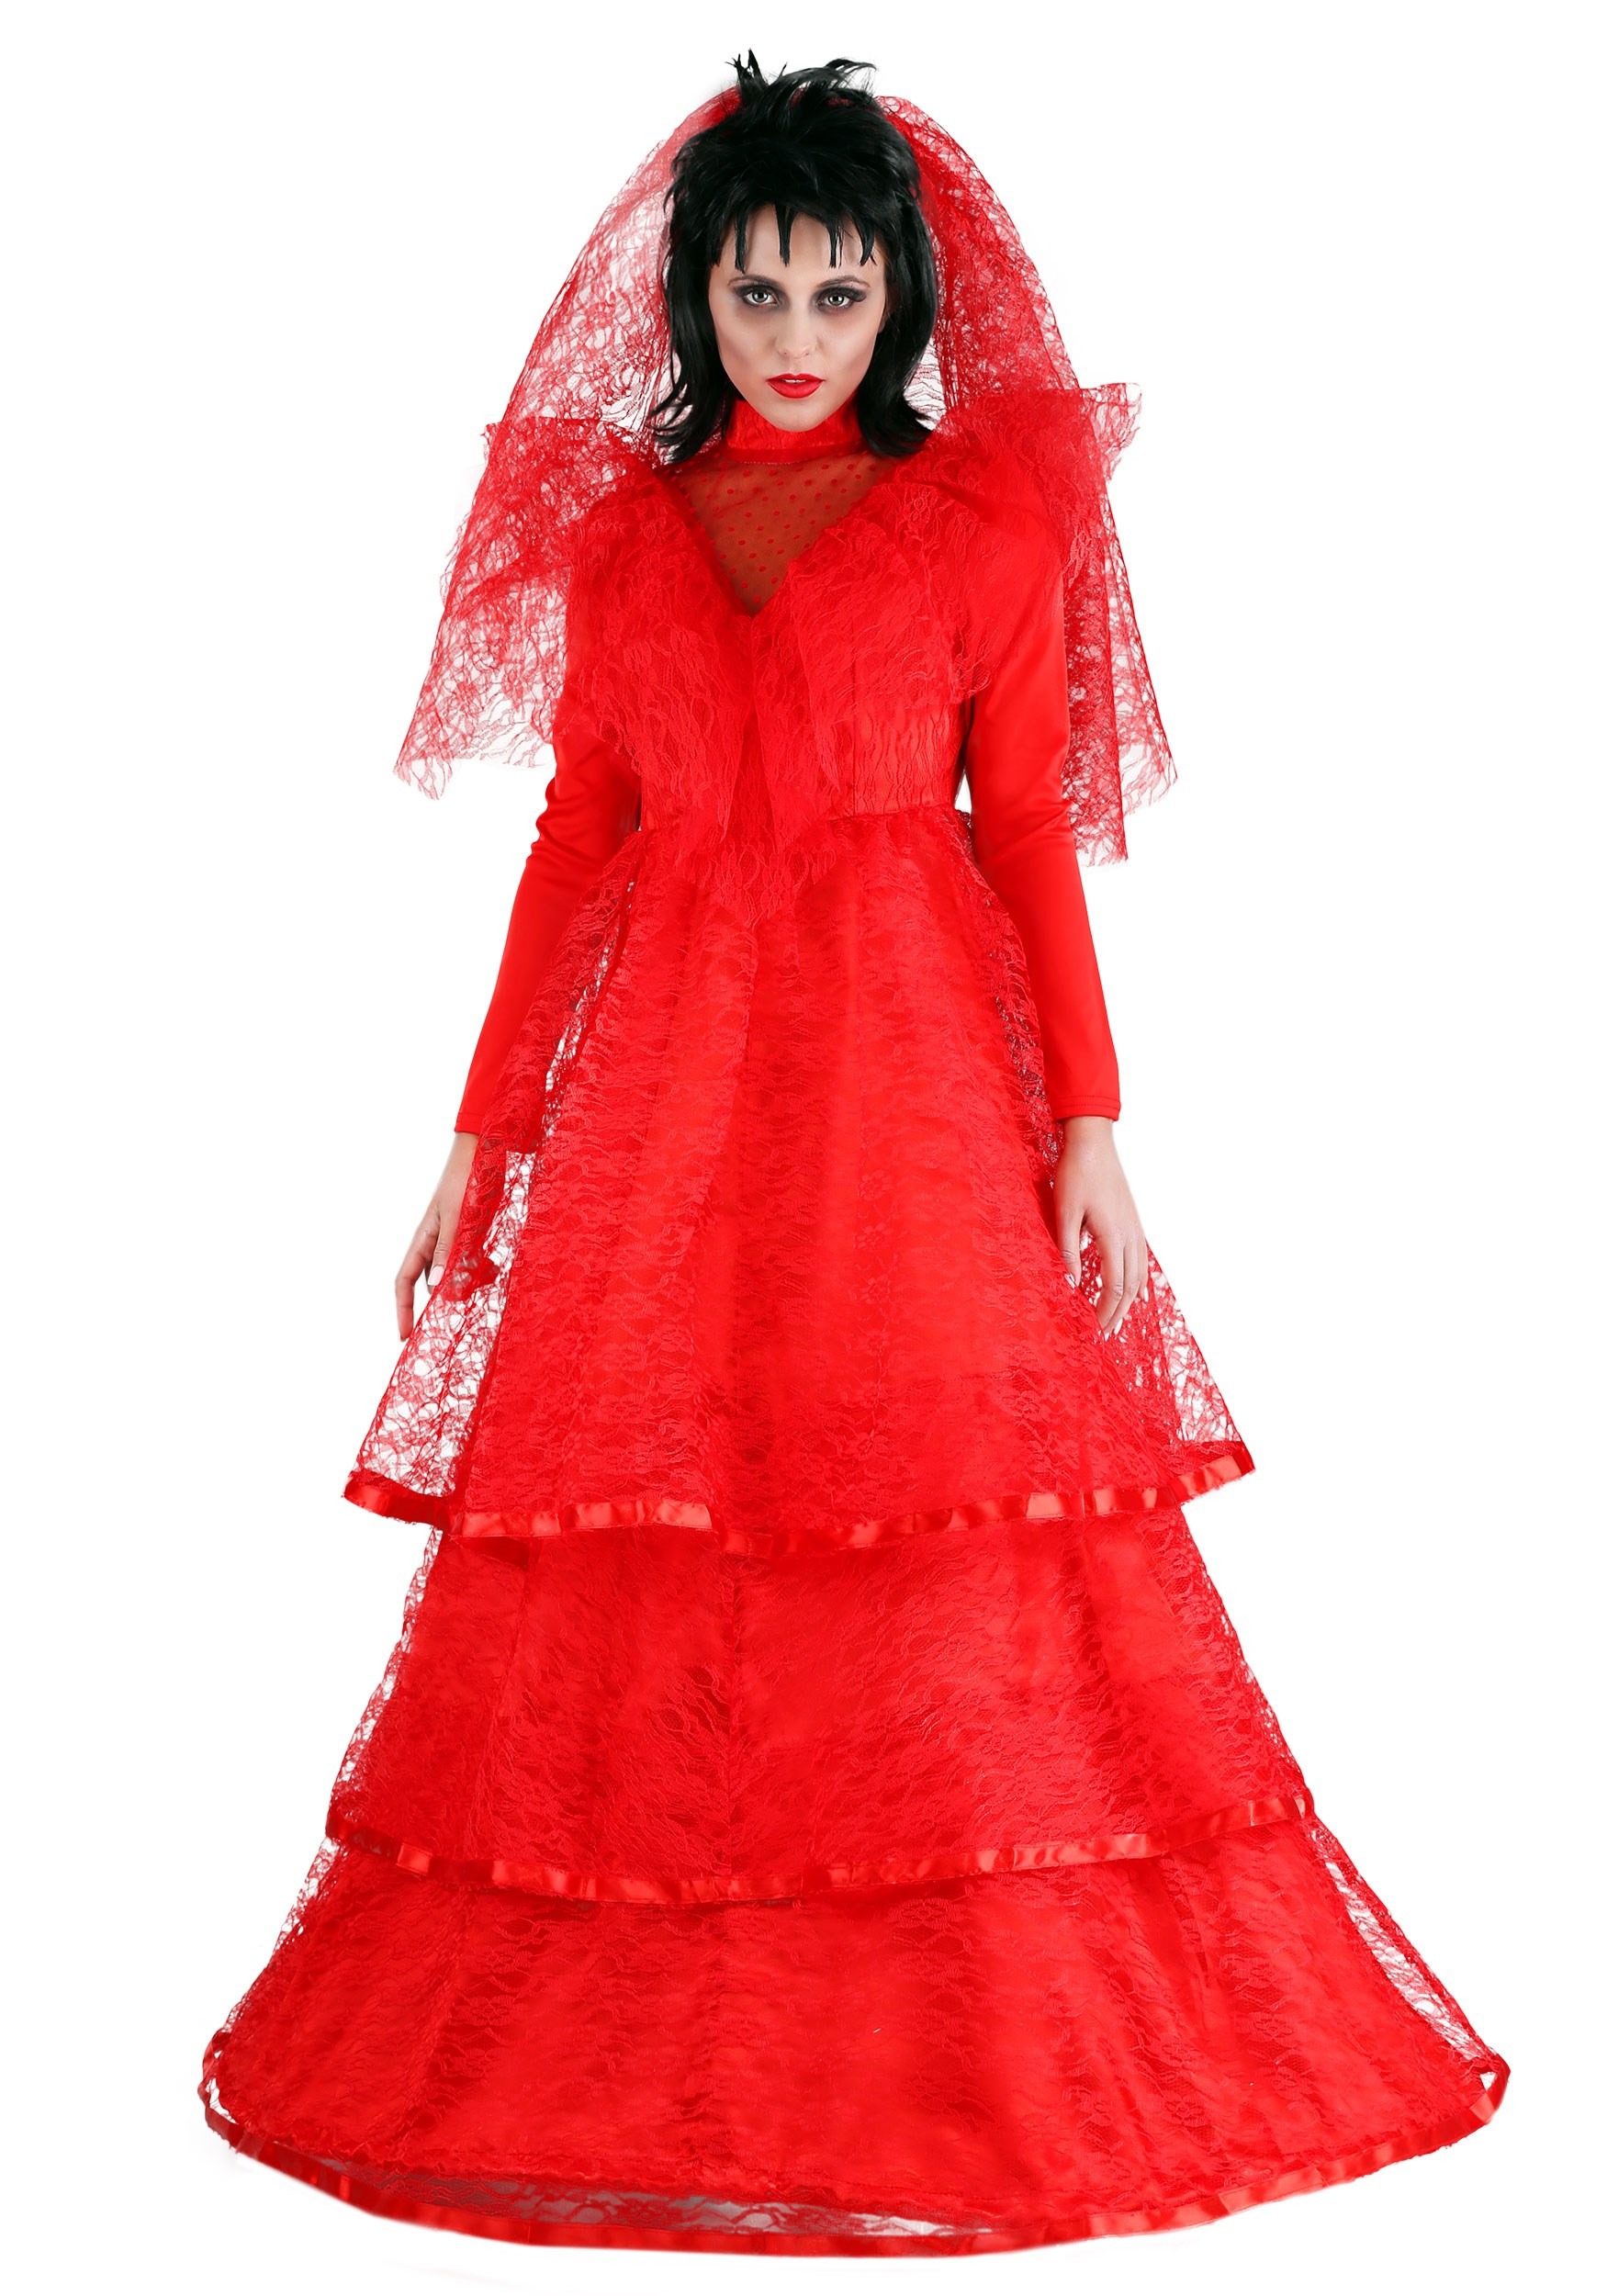 Image of Red Gothic Wedding Dress Plus Size Costume ID FUN2151PL-2X